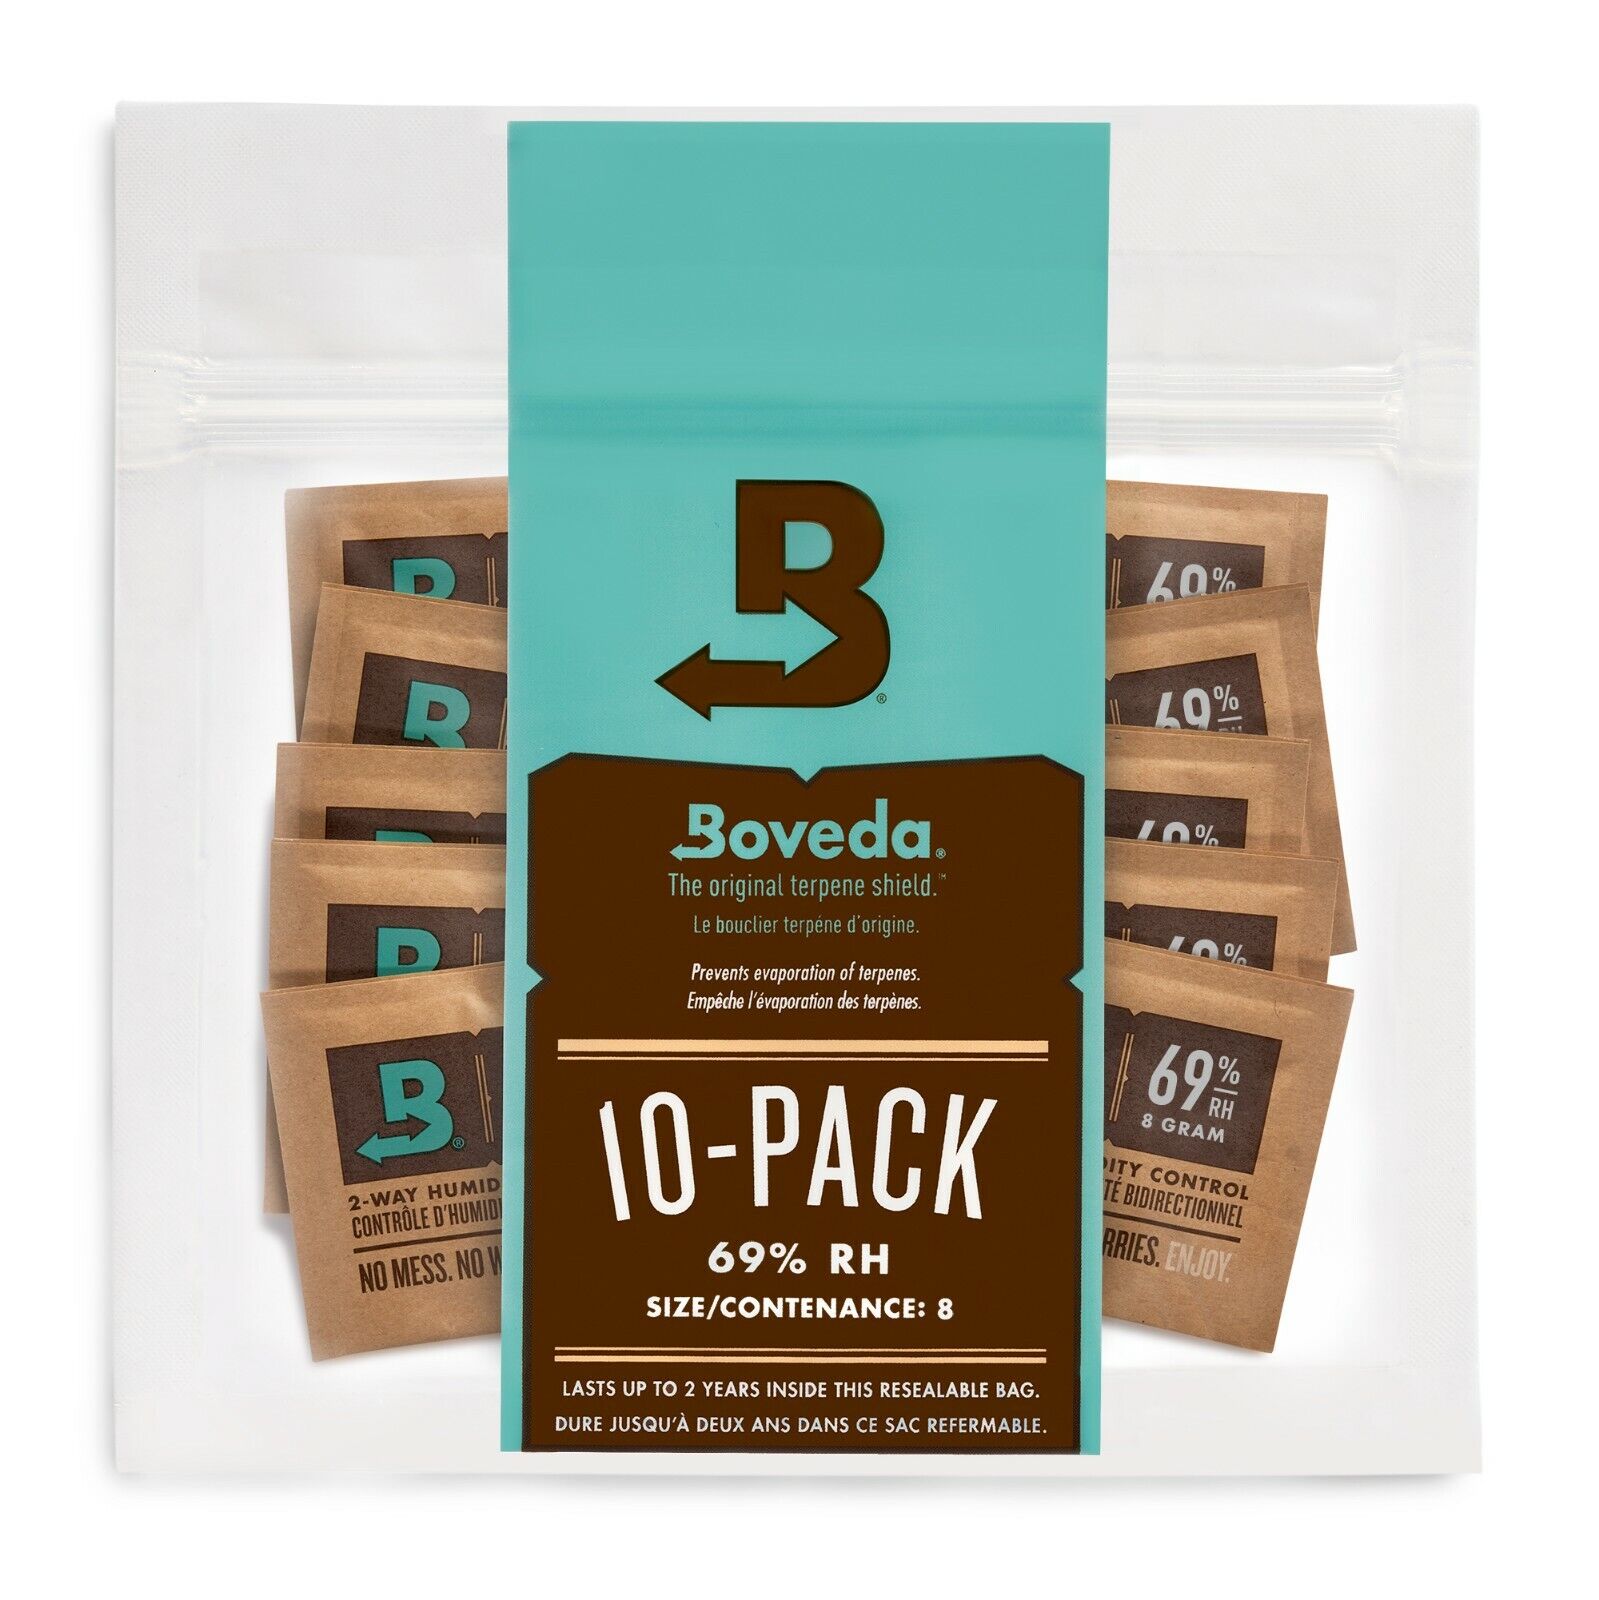 Boveda 69% RH 2-Way Humidity Control - Protects & Restores - Size 8 - 10 Count